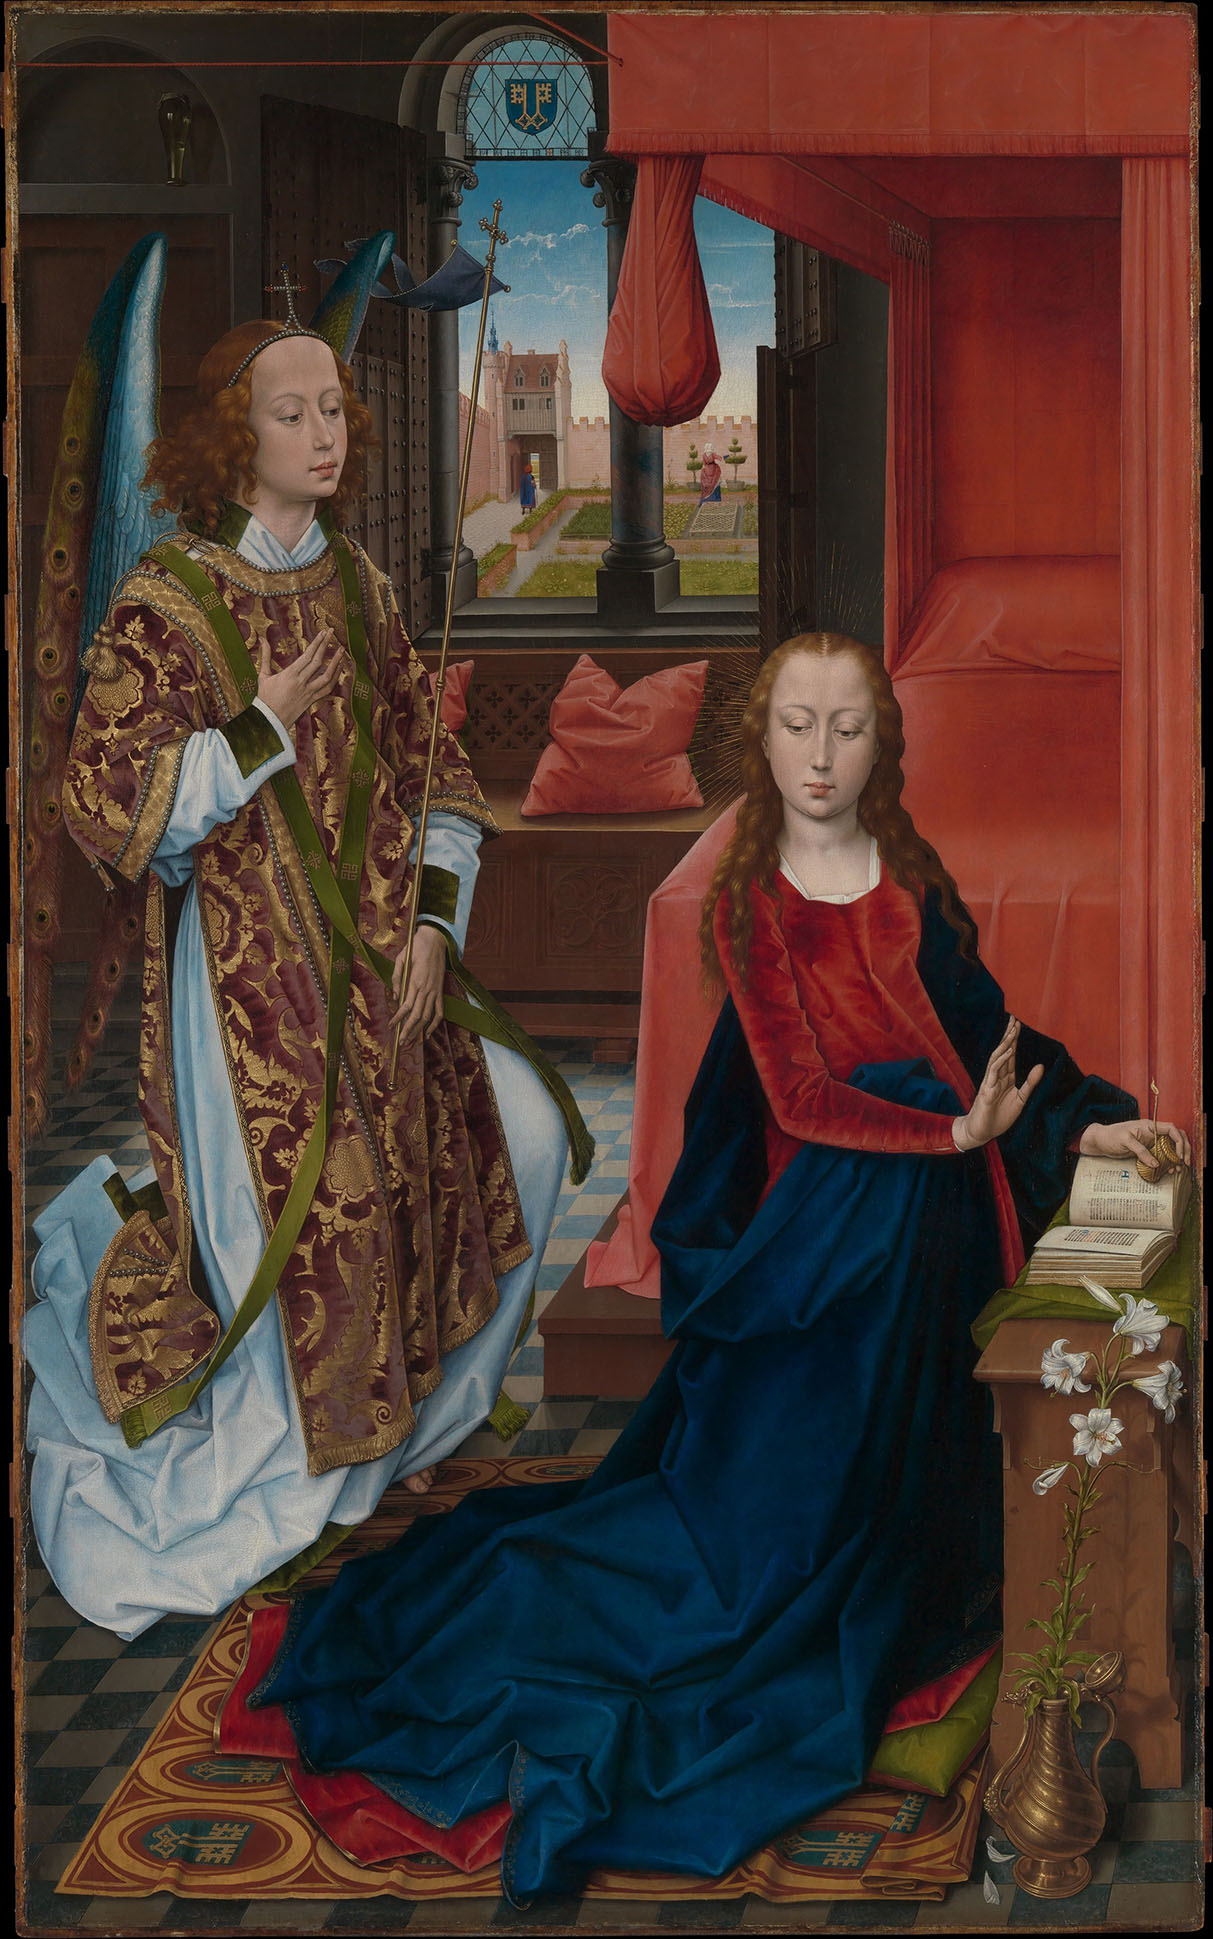 The original The Annunciation by Hans Memling